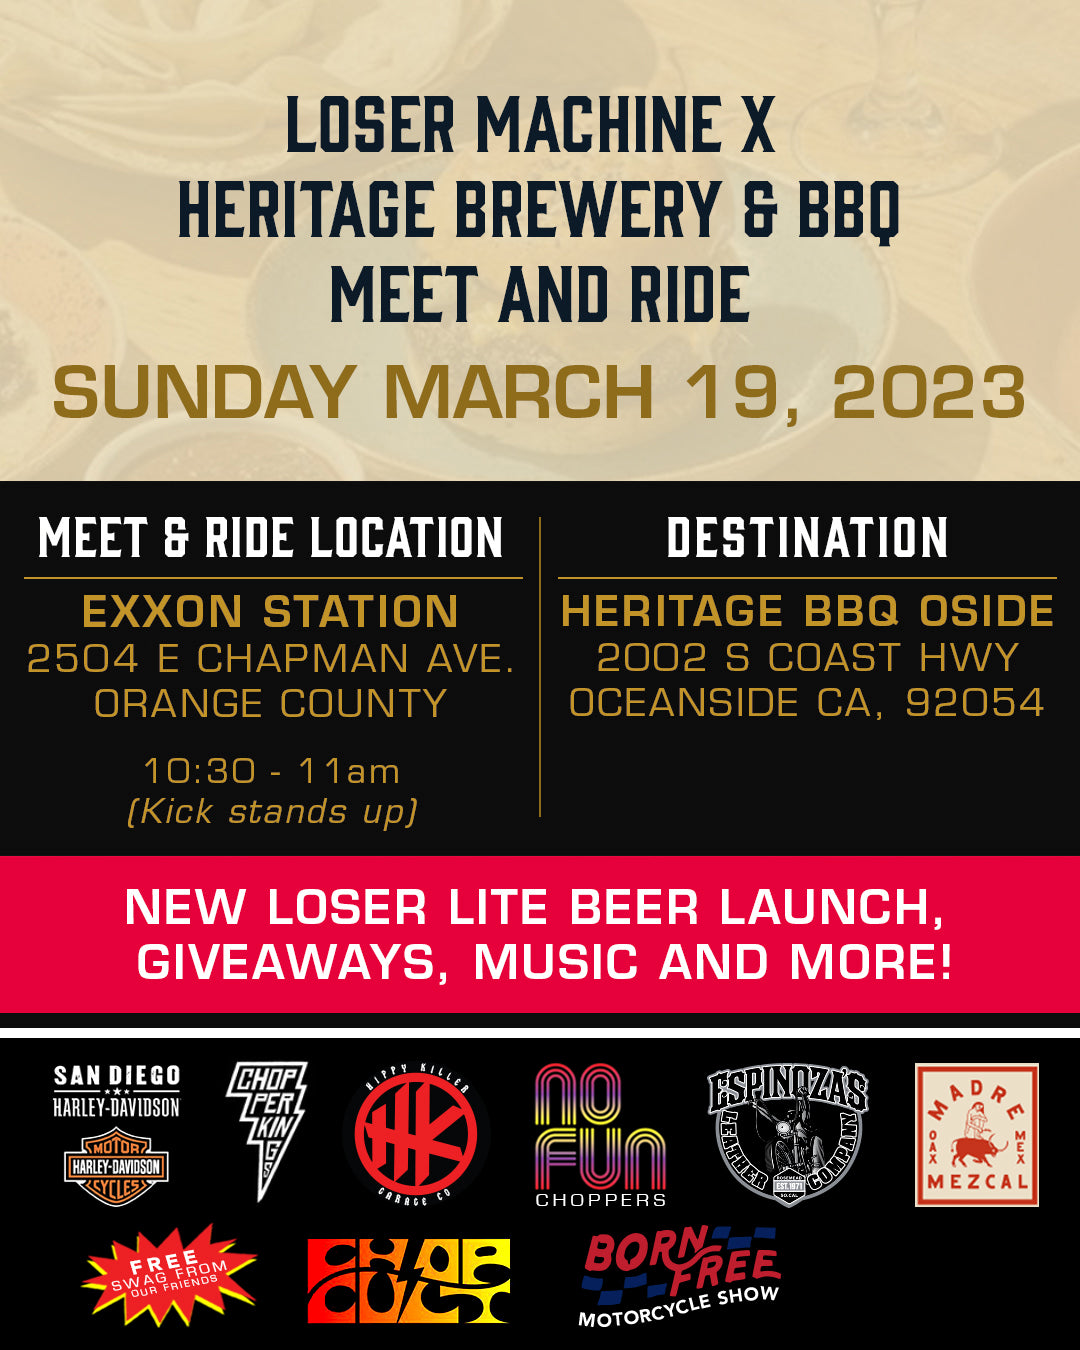 LMC x Heritage BBQ Mee and Ride